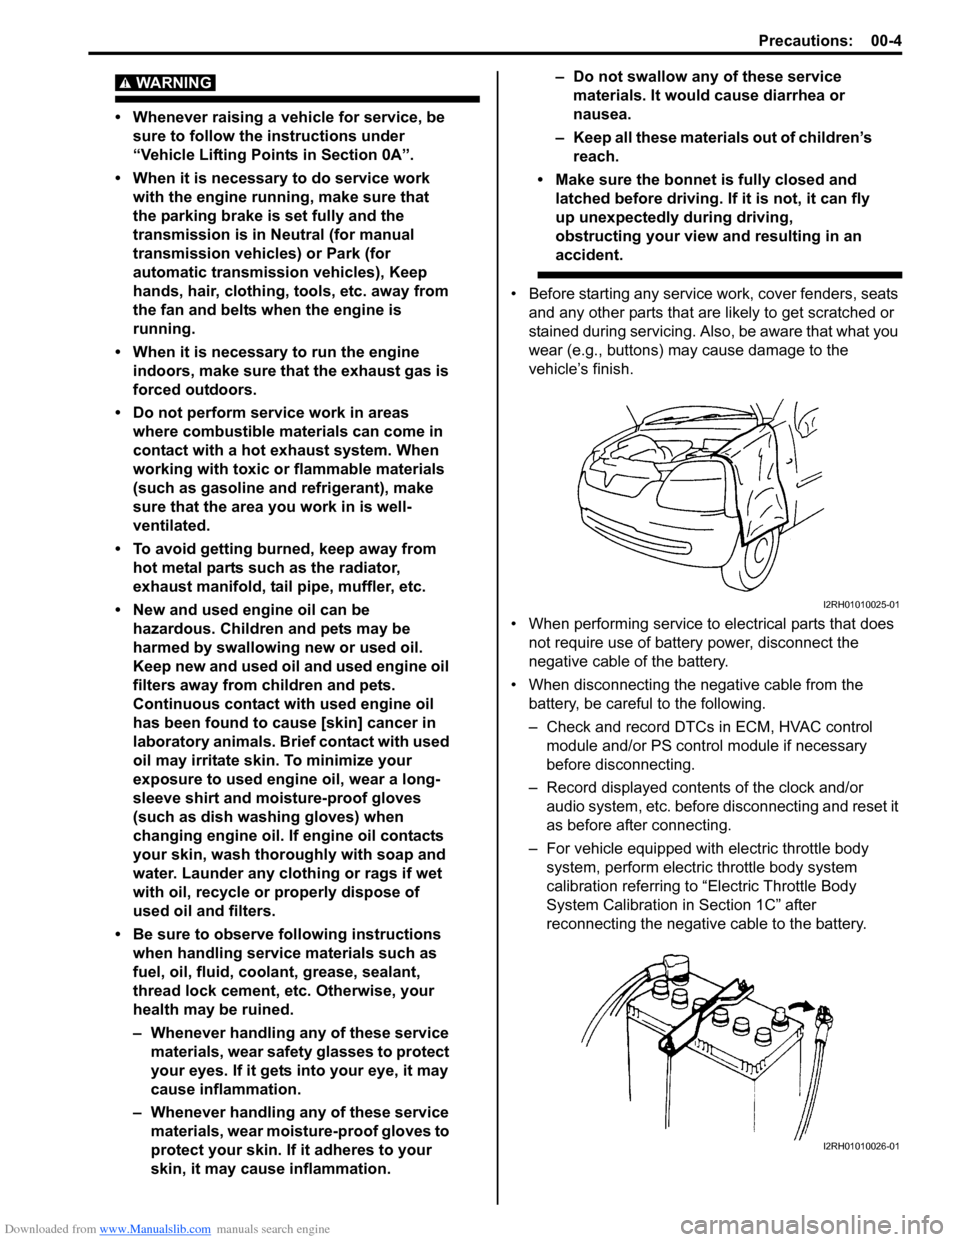 SUZUKI SX4 2006 1.G Service User Guide Downloaded from www.Manualslib.com manuals search engine Precautions: 00-4
WARNING! 
• Whenever raising a vehicle for service, be 
sure to follow the instructions under 
“Vehicle Lifting Points in